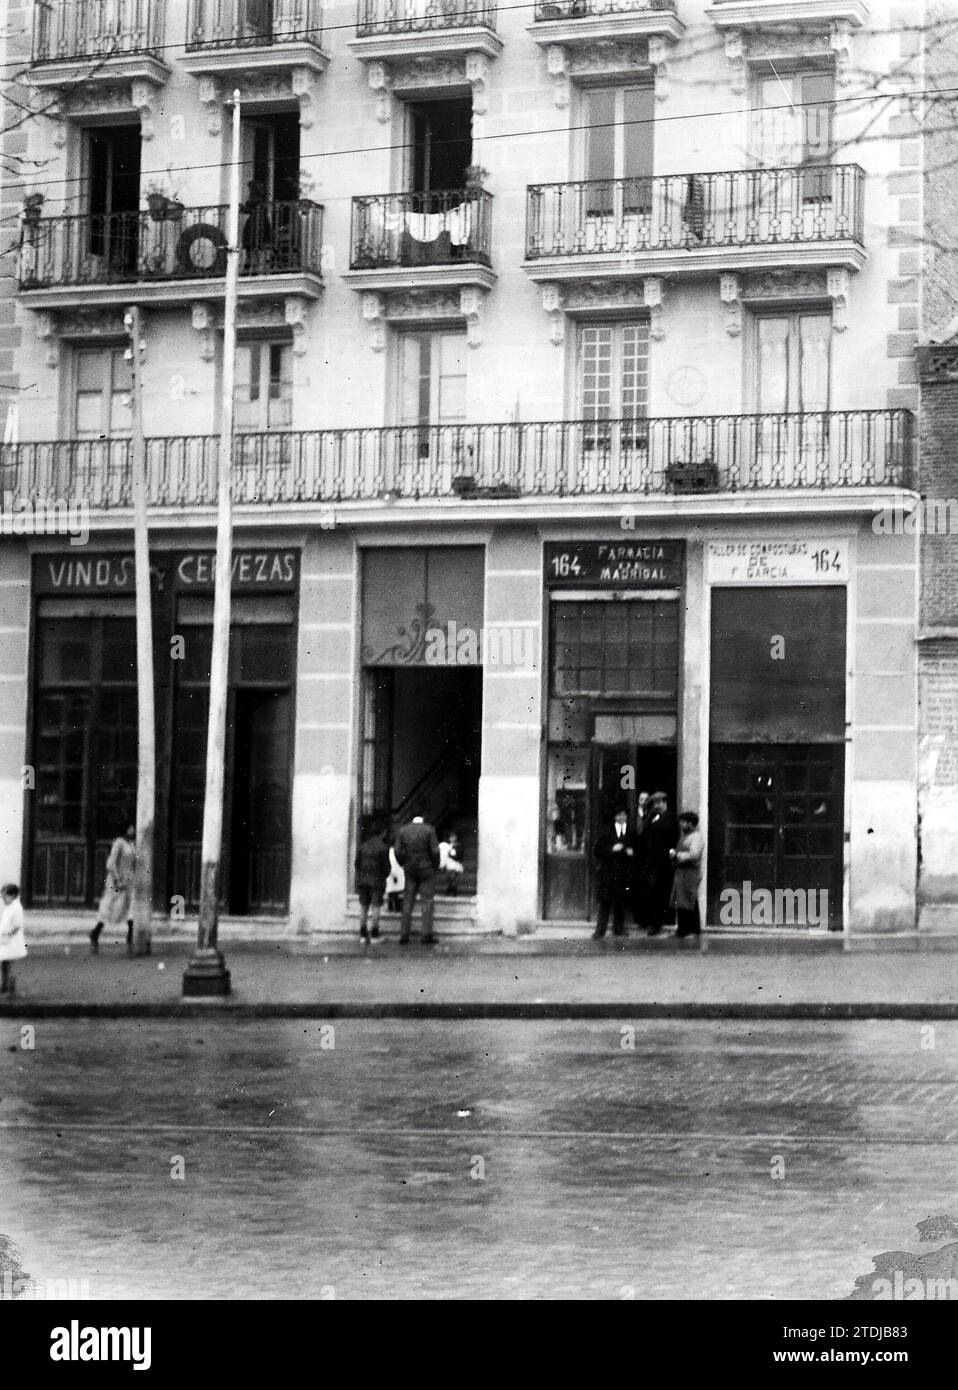 Madrid, 03/13/1921. Arrest of mechanic Pedro Mateu, for the murder of Eduardo Dato. In the image, the facade of the house, in whose rooms on the lower left interior floor the criminal stayed. Credit: Album / Archivo ABC / Julio Duque,Portela Stock Photo